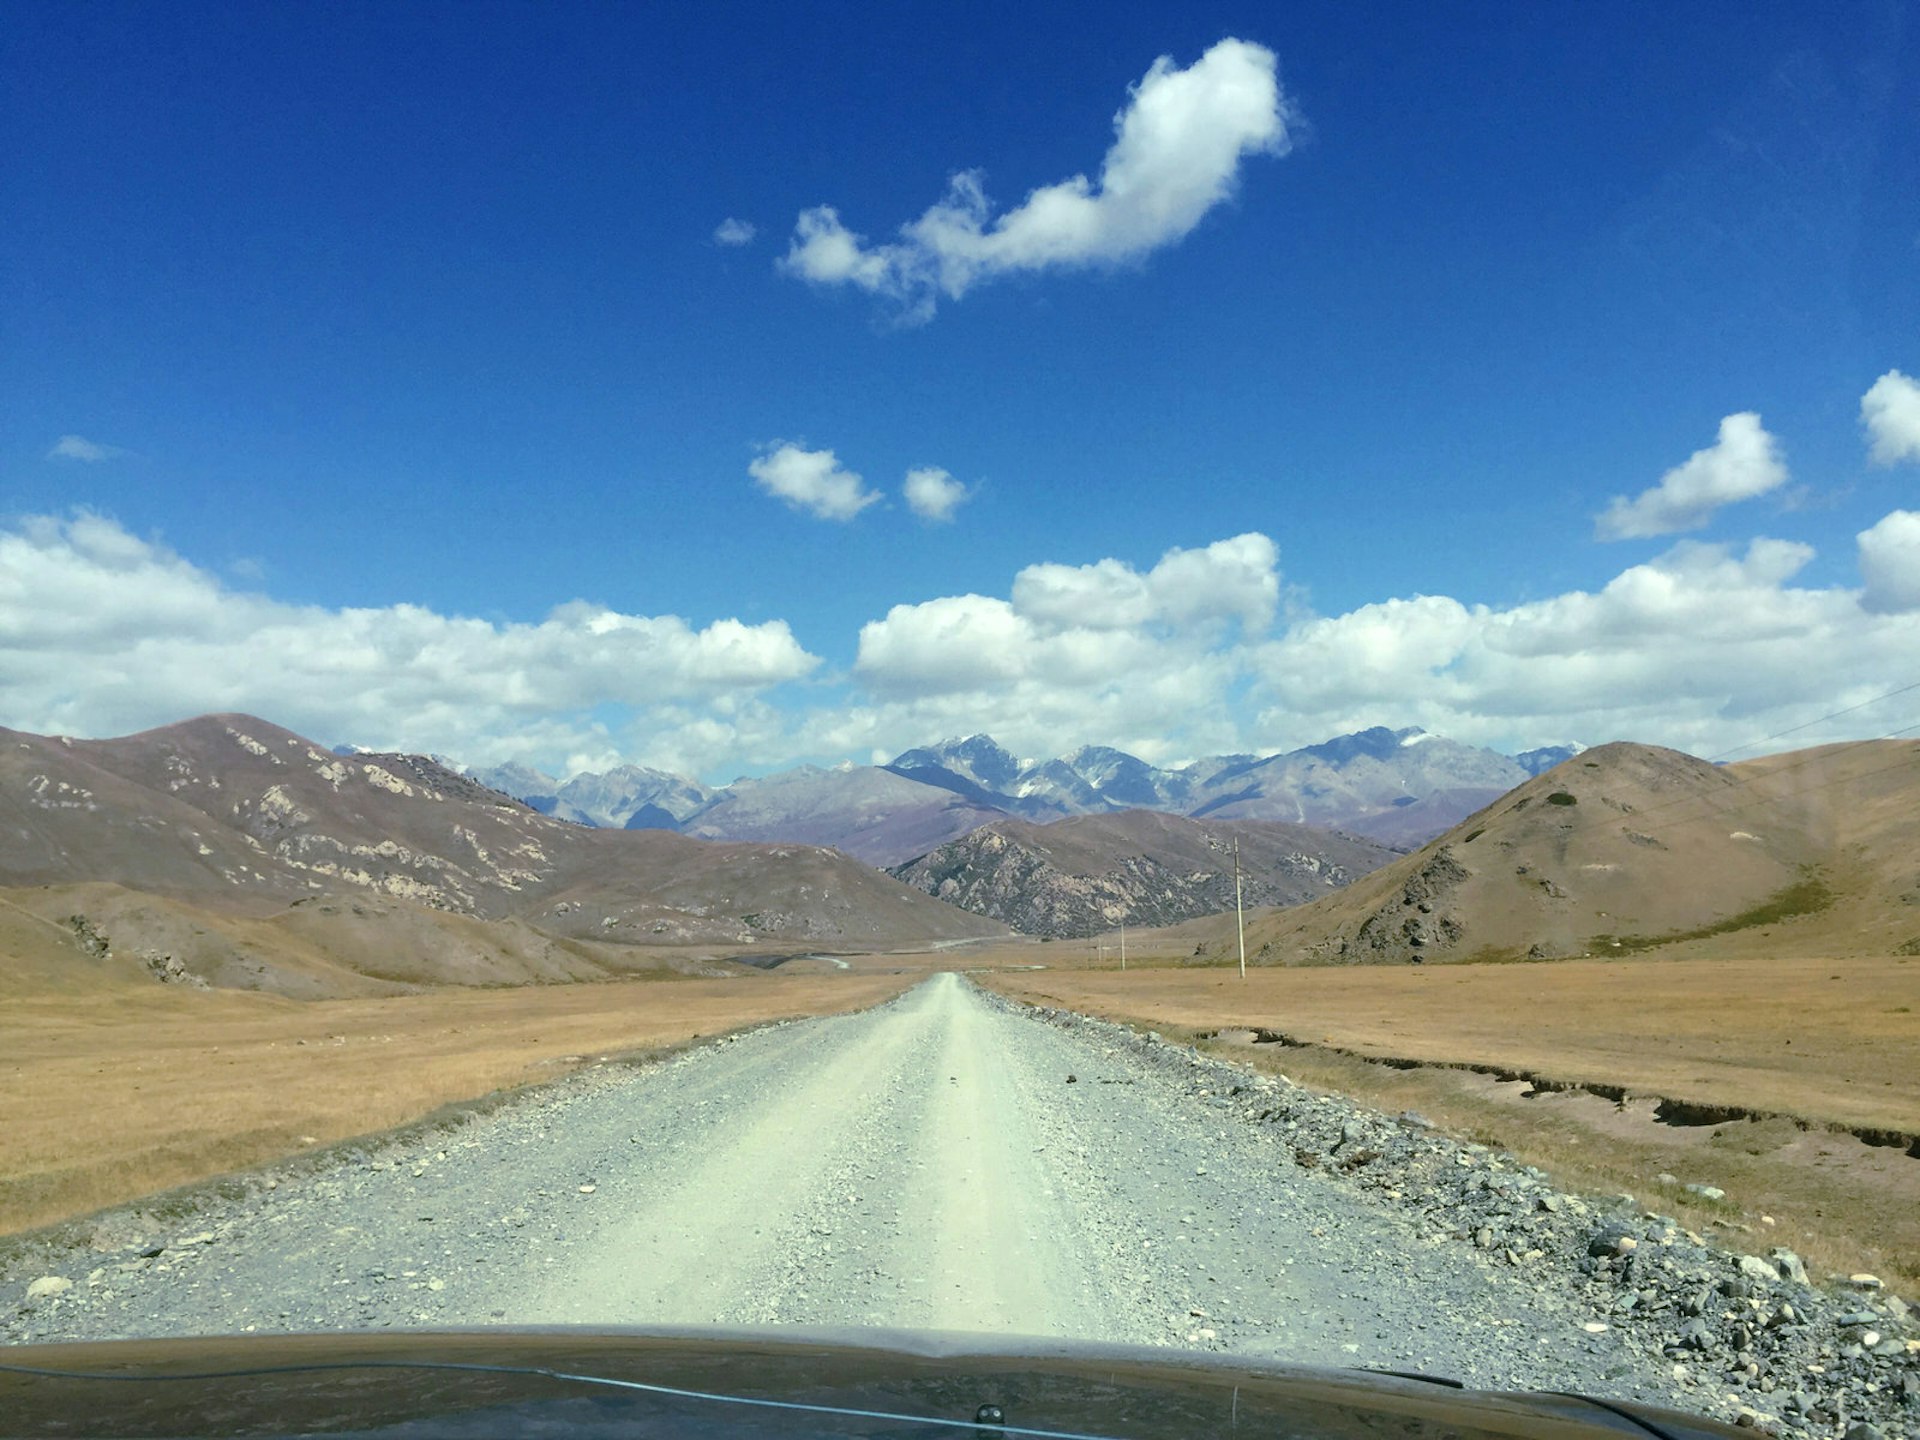 View through the windscreen of an SUV onto a wide dirt road leading into mountains, with blue sky above © Megan Eaves / Lonely Planet